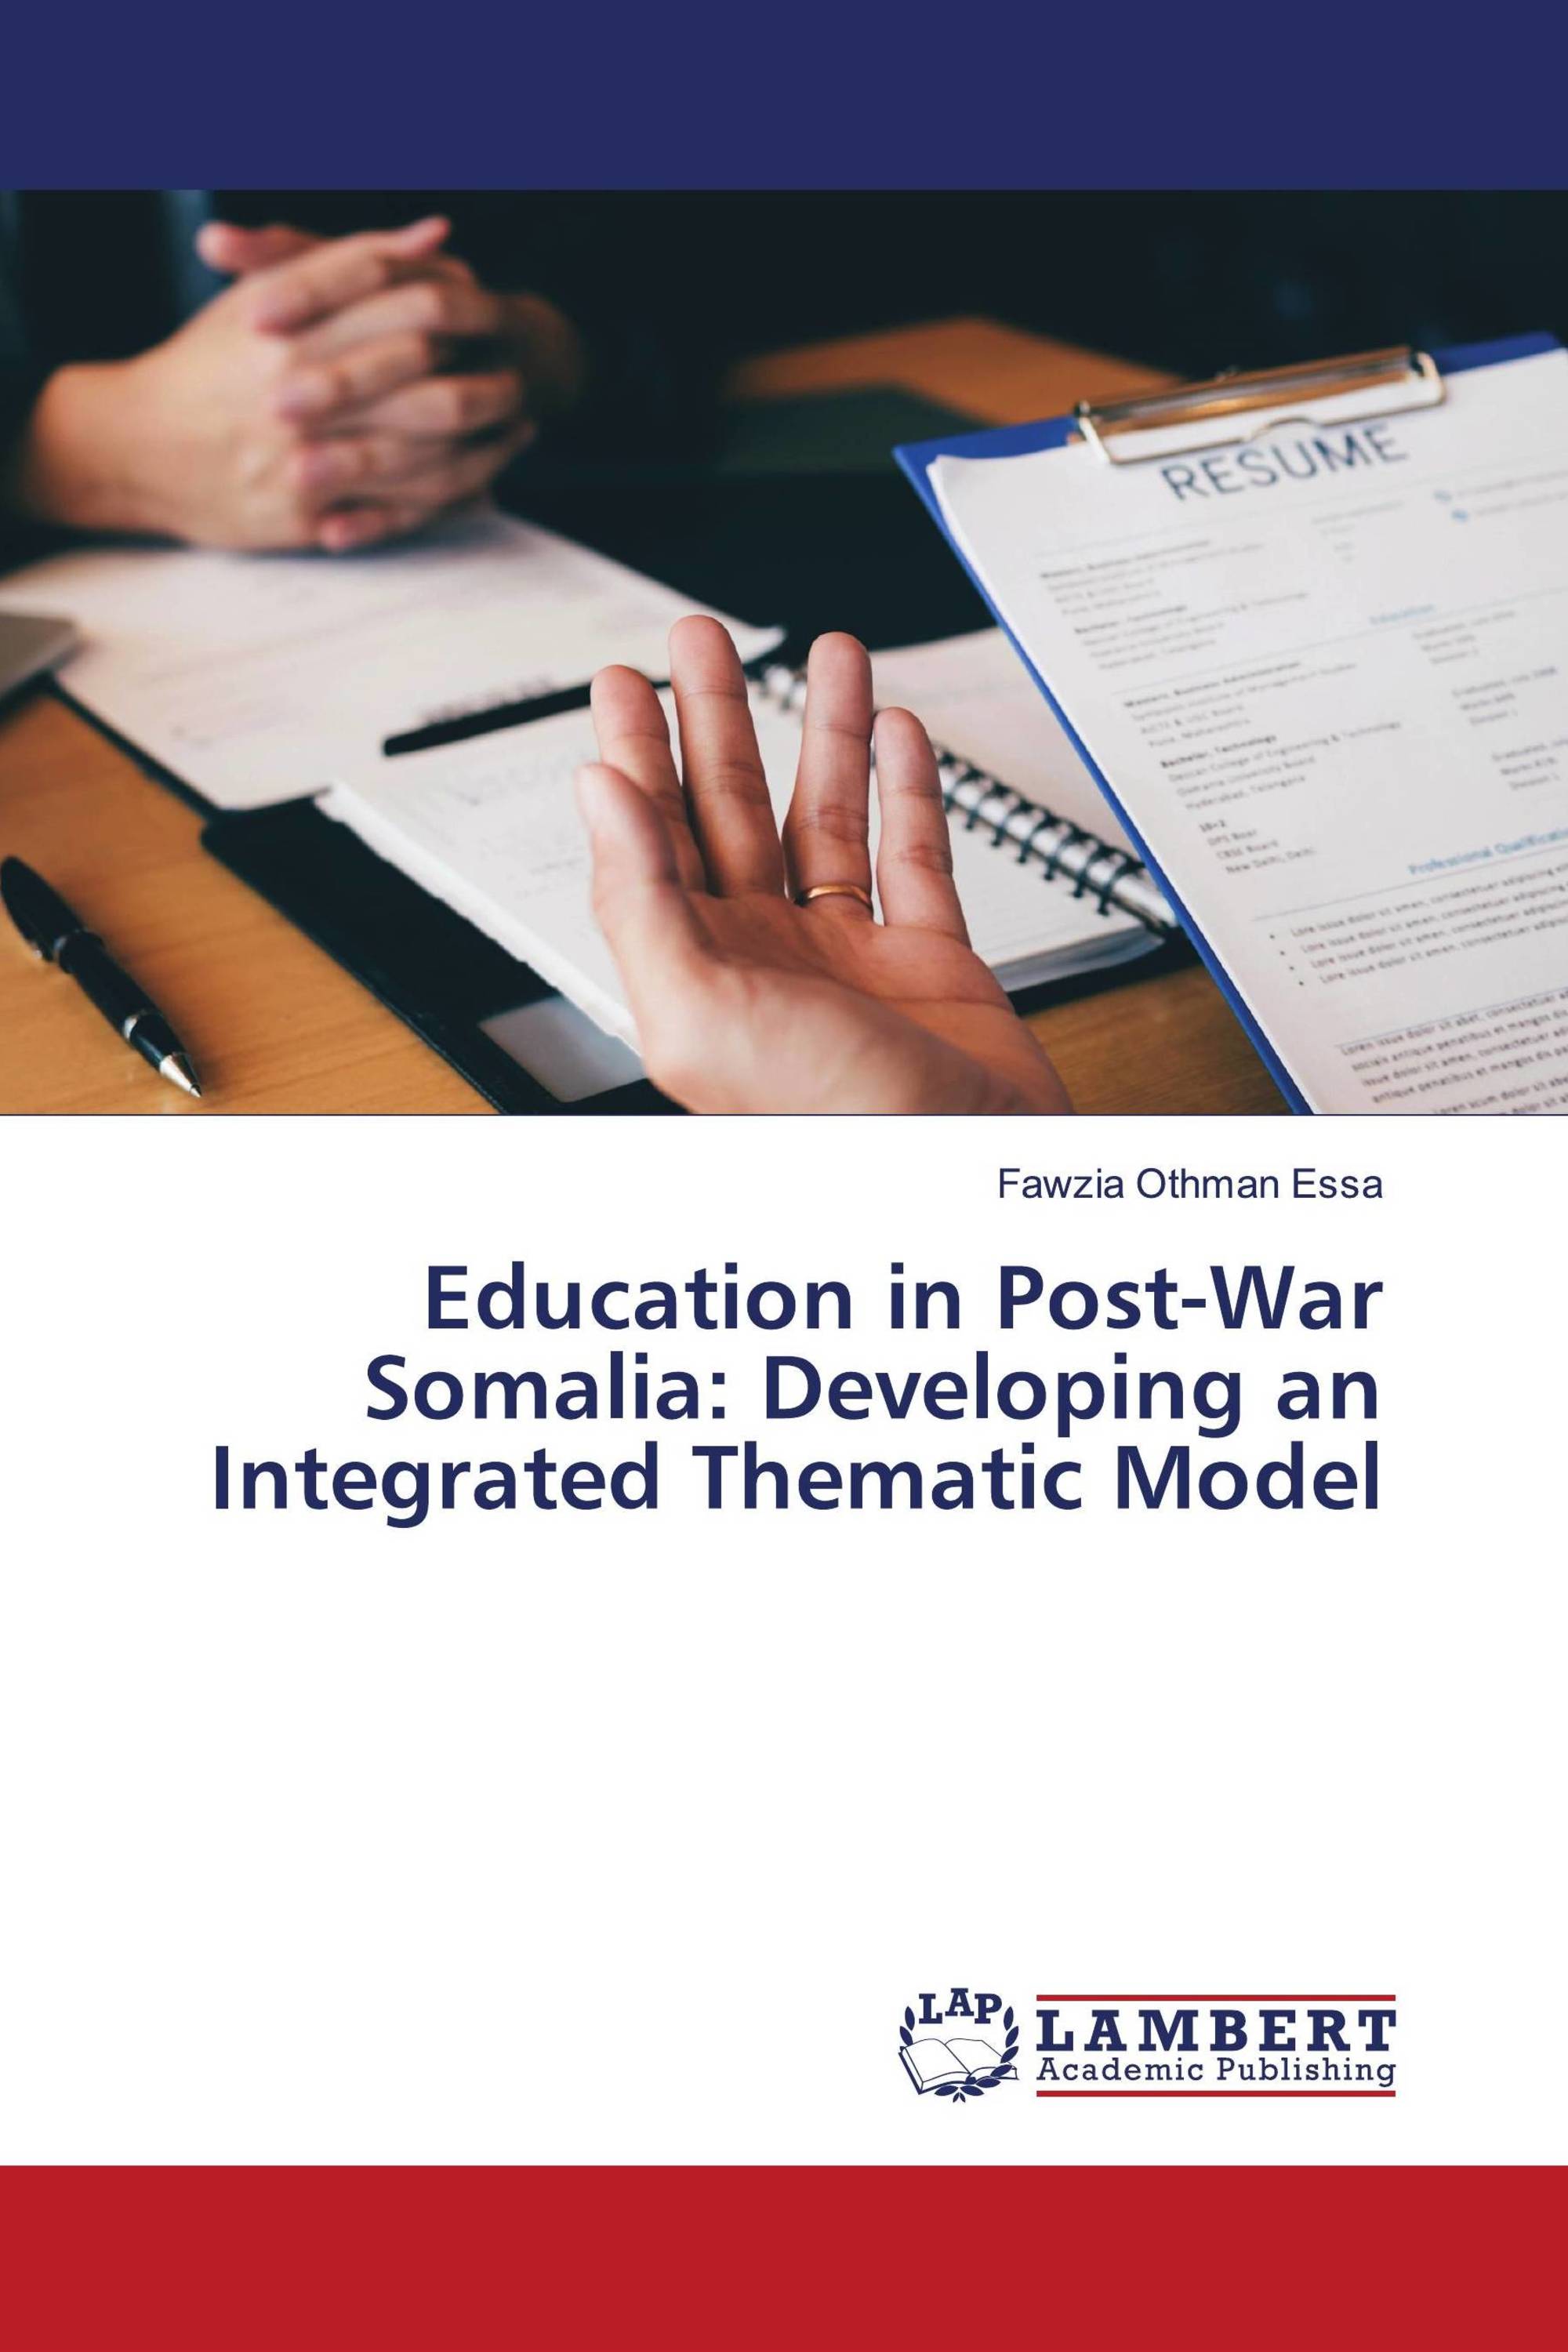 Education in Post-War Somalia: Developing an Integrated Thematic Model